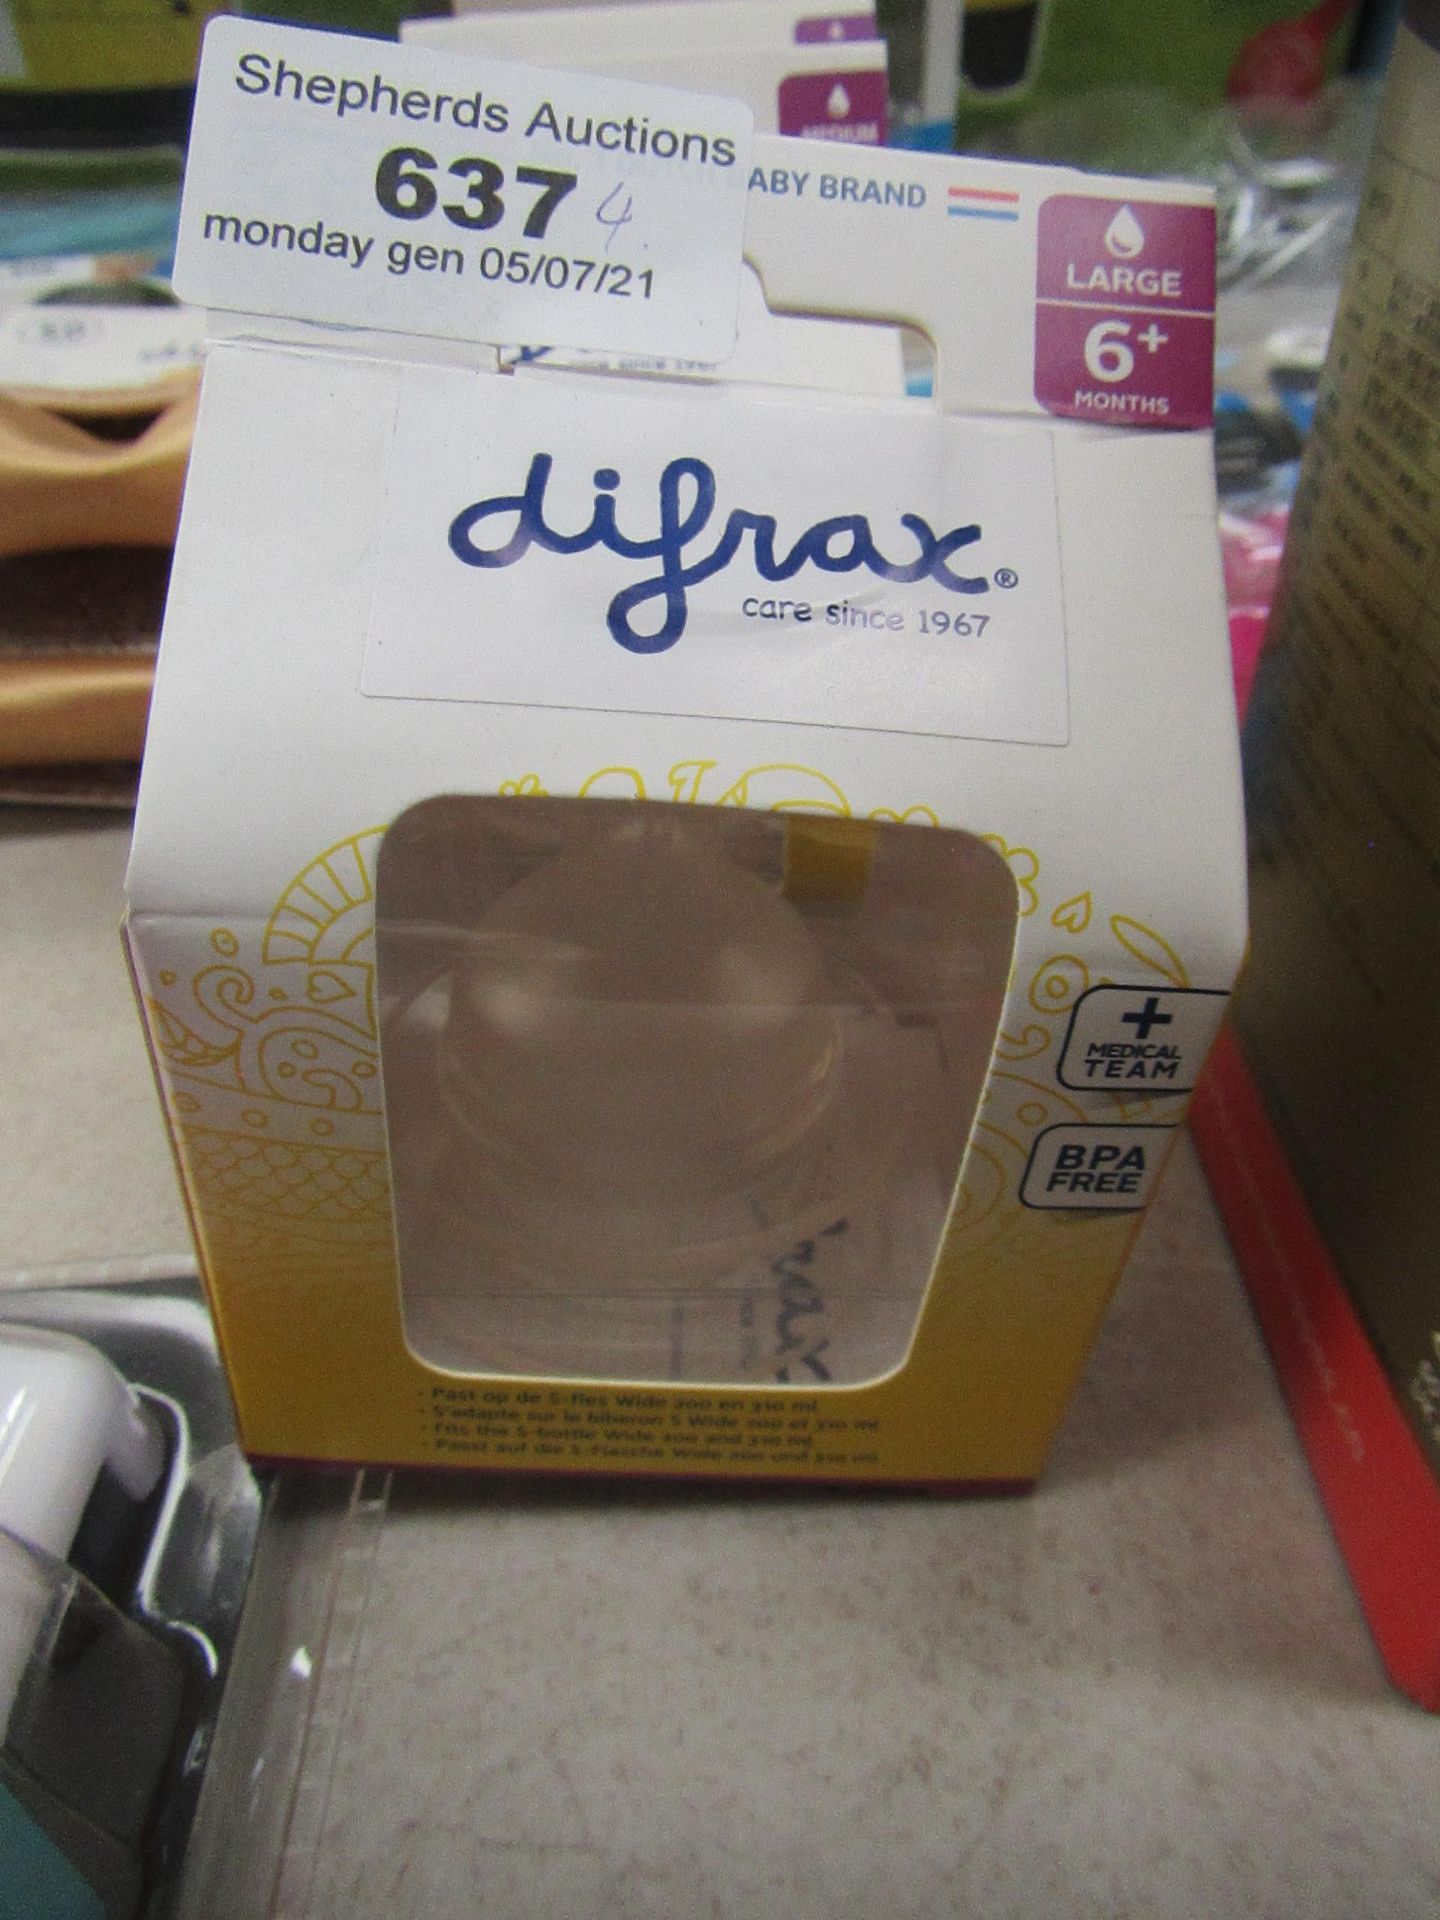 4X DIFRAX TEATS, SMALL, MEDIUM, LARGE, AND XL, NEW IN PACKAGE.